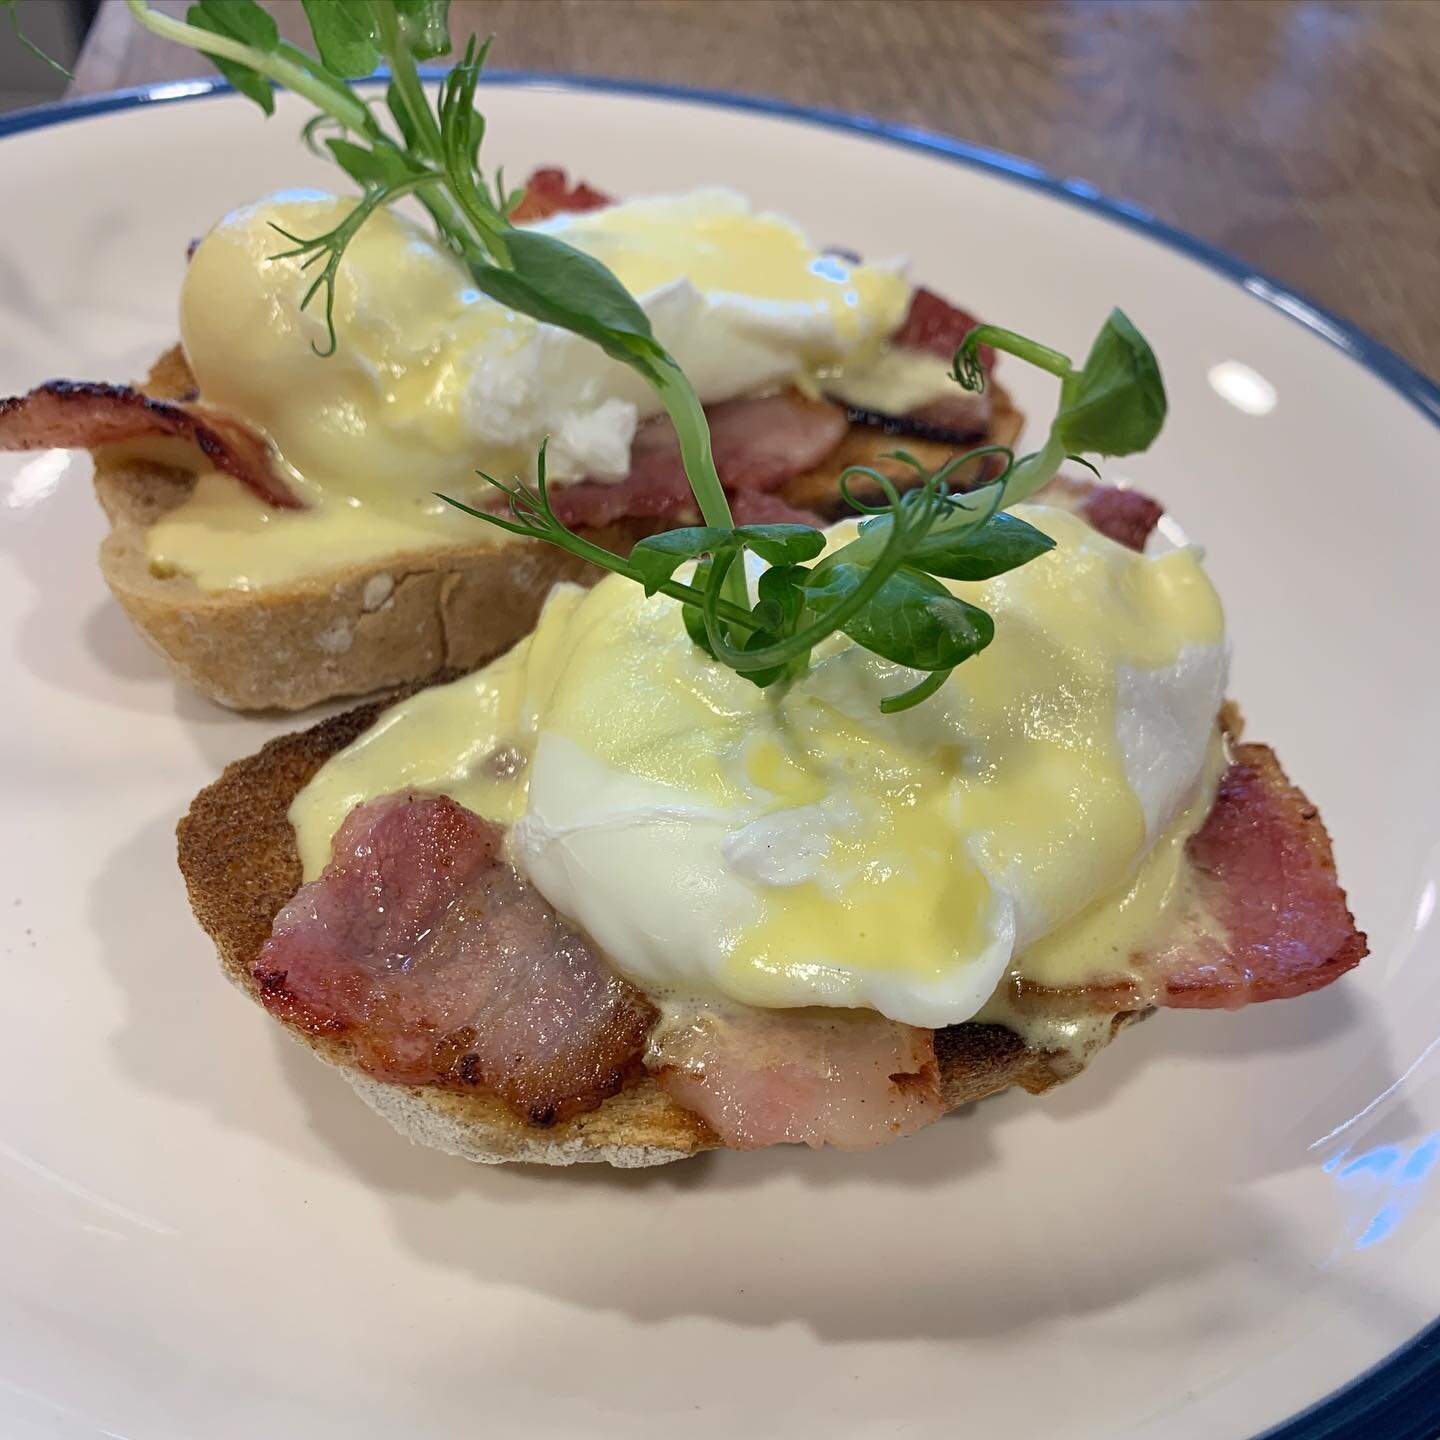 💥Saturday Brunch starting tomorrow💥
Serving Eggs Ben, avocado toast , pancakes and porridge 
- Saturdays only - no bookings required 
#brunch #saturdaybrunch #eggsbenedict #eggseggseggs #pancakes #midleton #thegranary